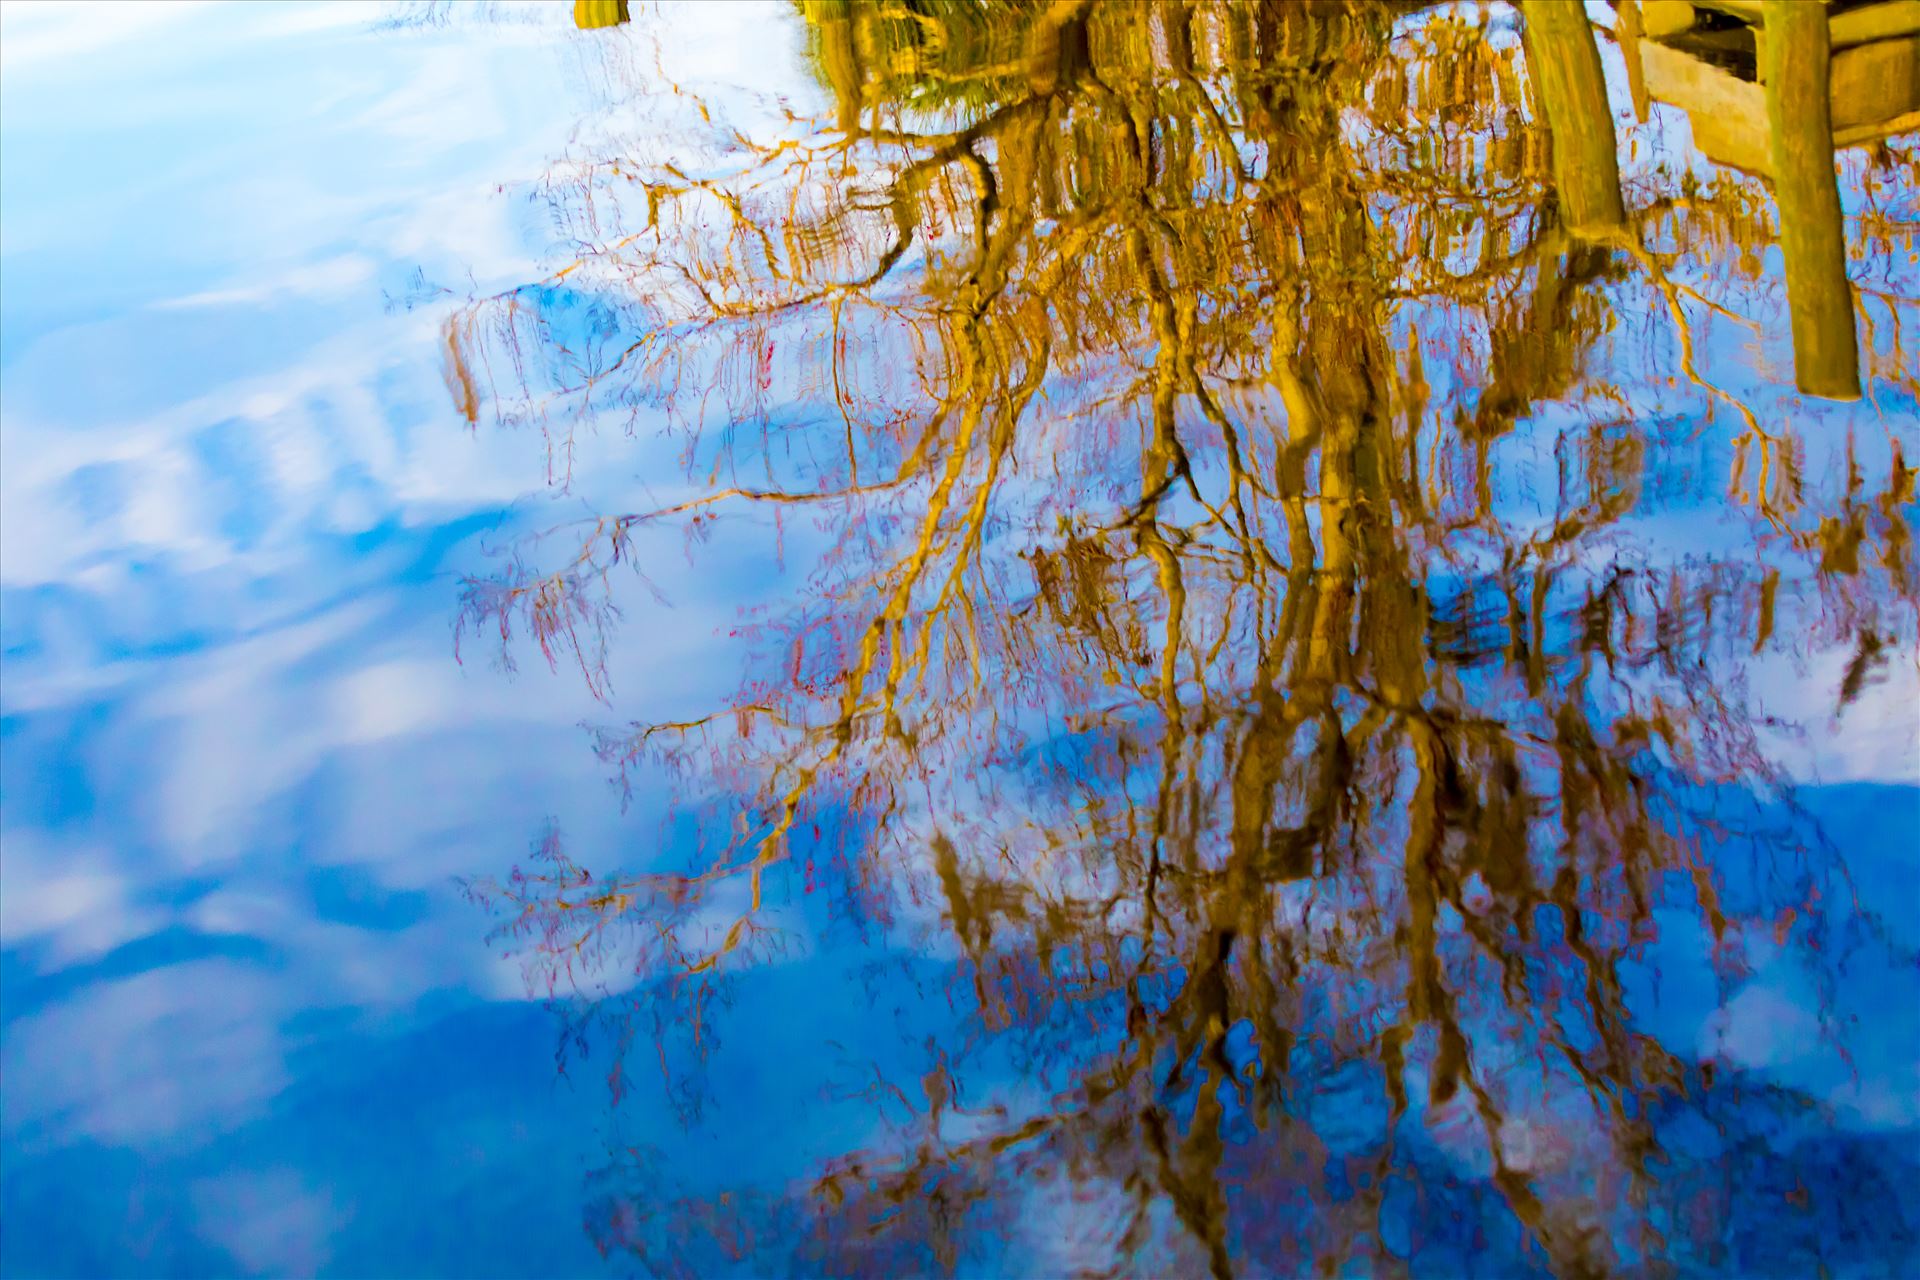 Reflections-5.jpg - Blue sky, clouds, tree reflections on the water. by Cat Cornish Photography